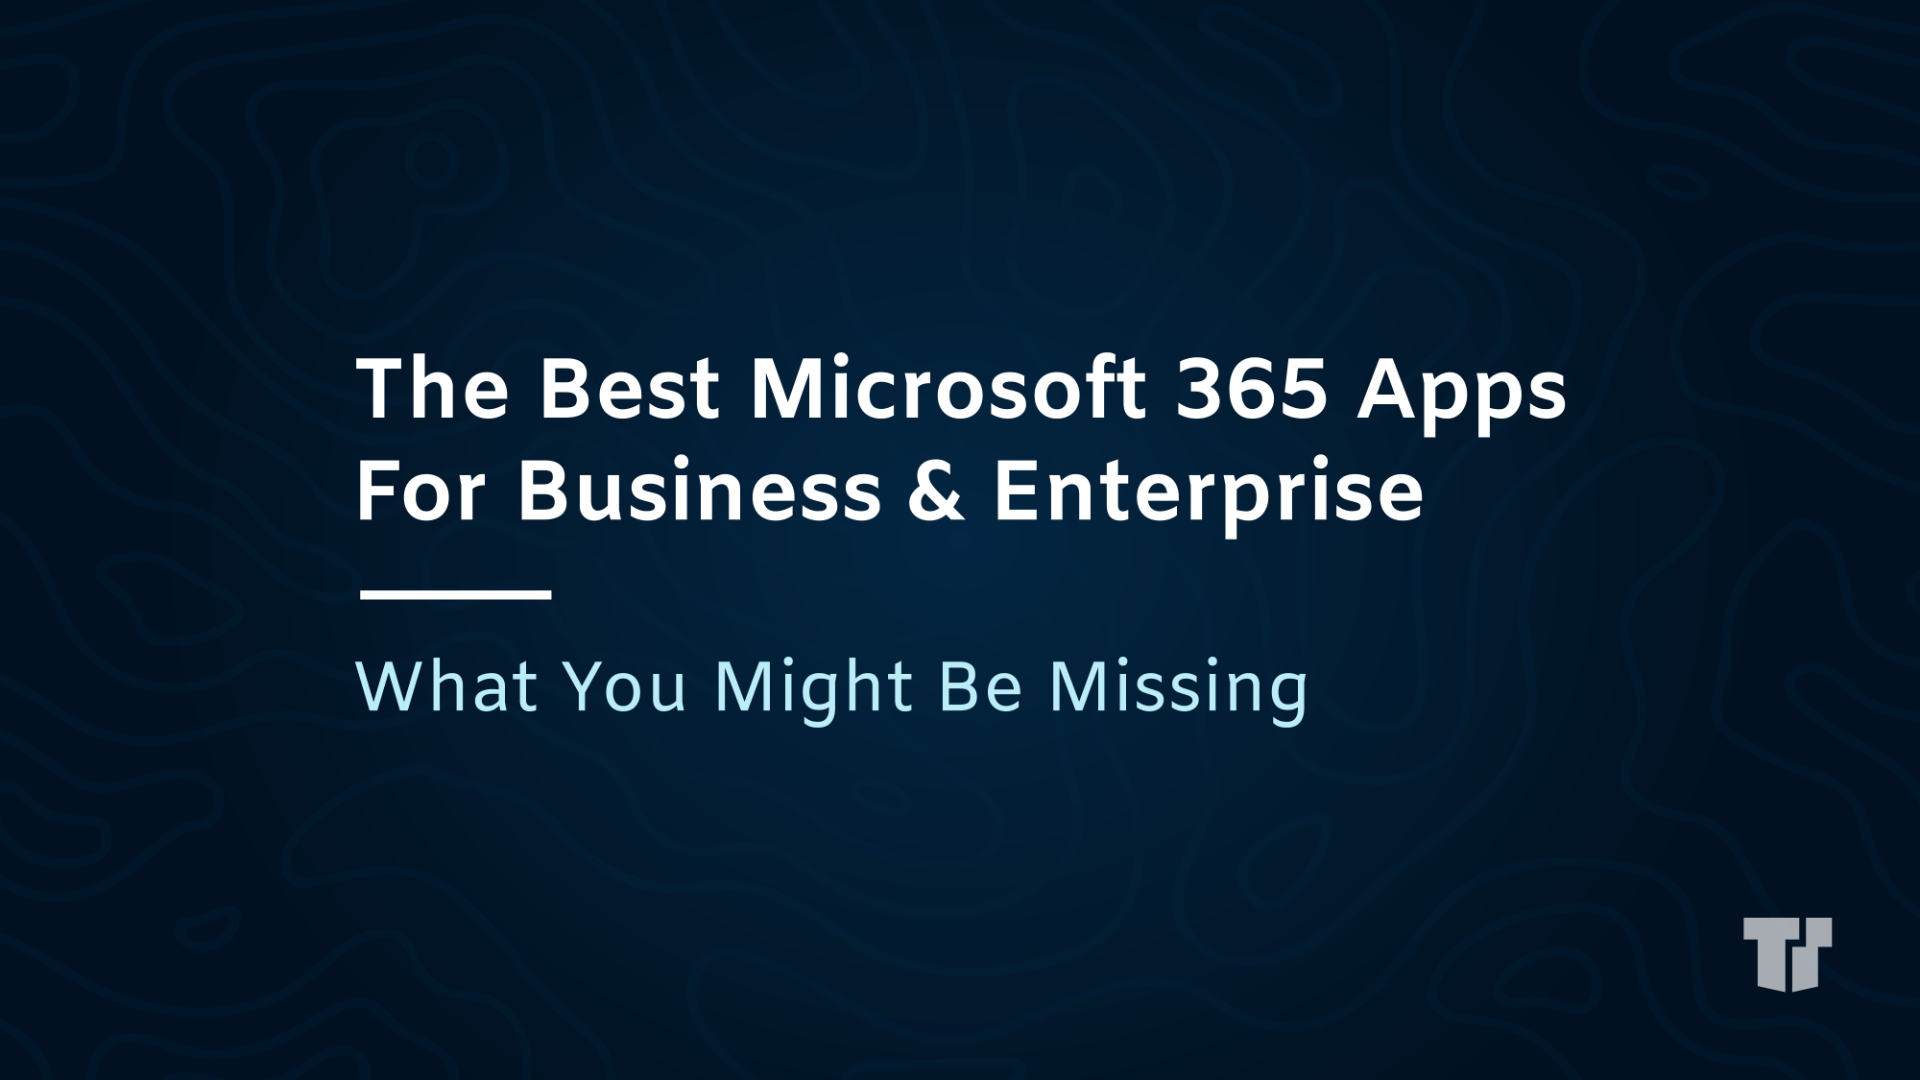 The Best M365 Apps For Business & Enterprise: What You Might Be Missing cover image